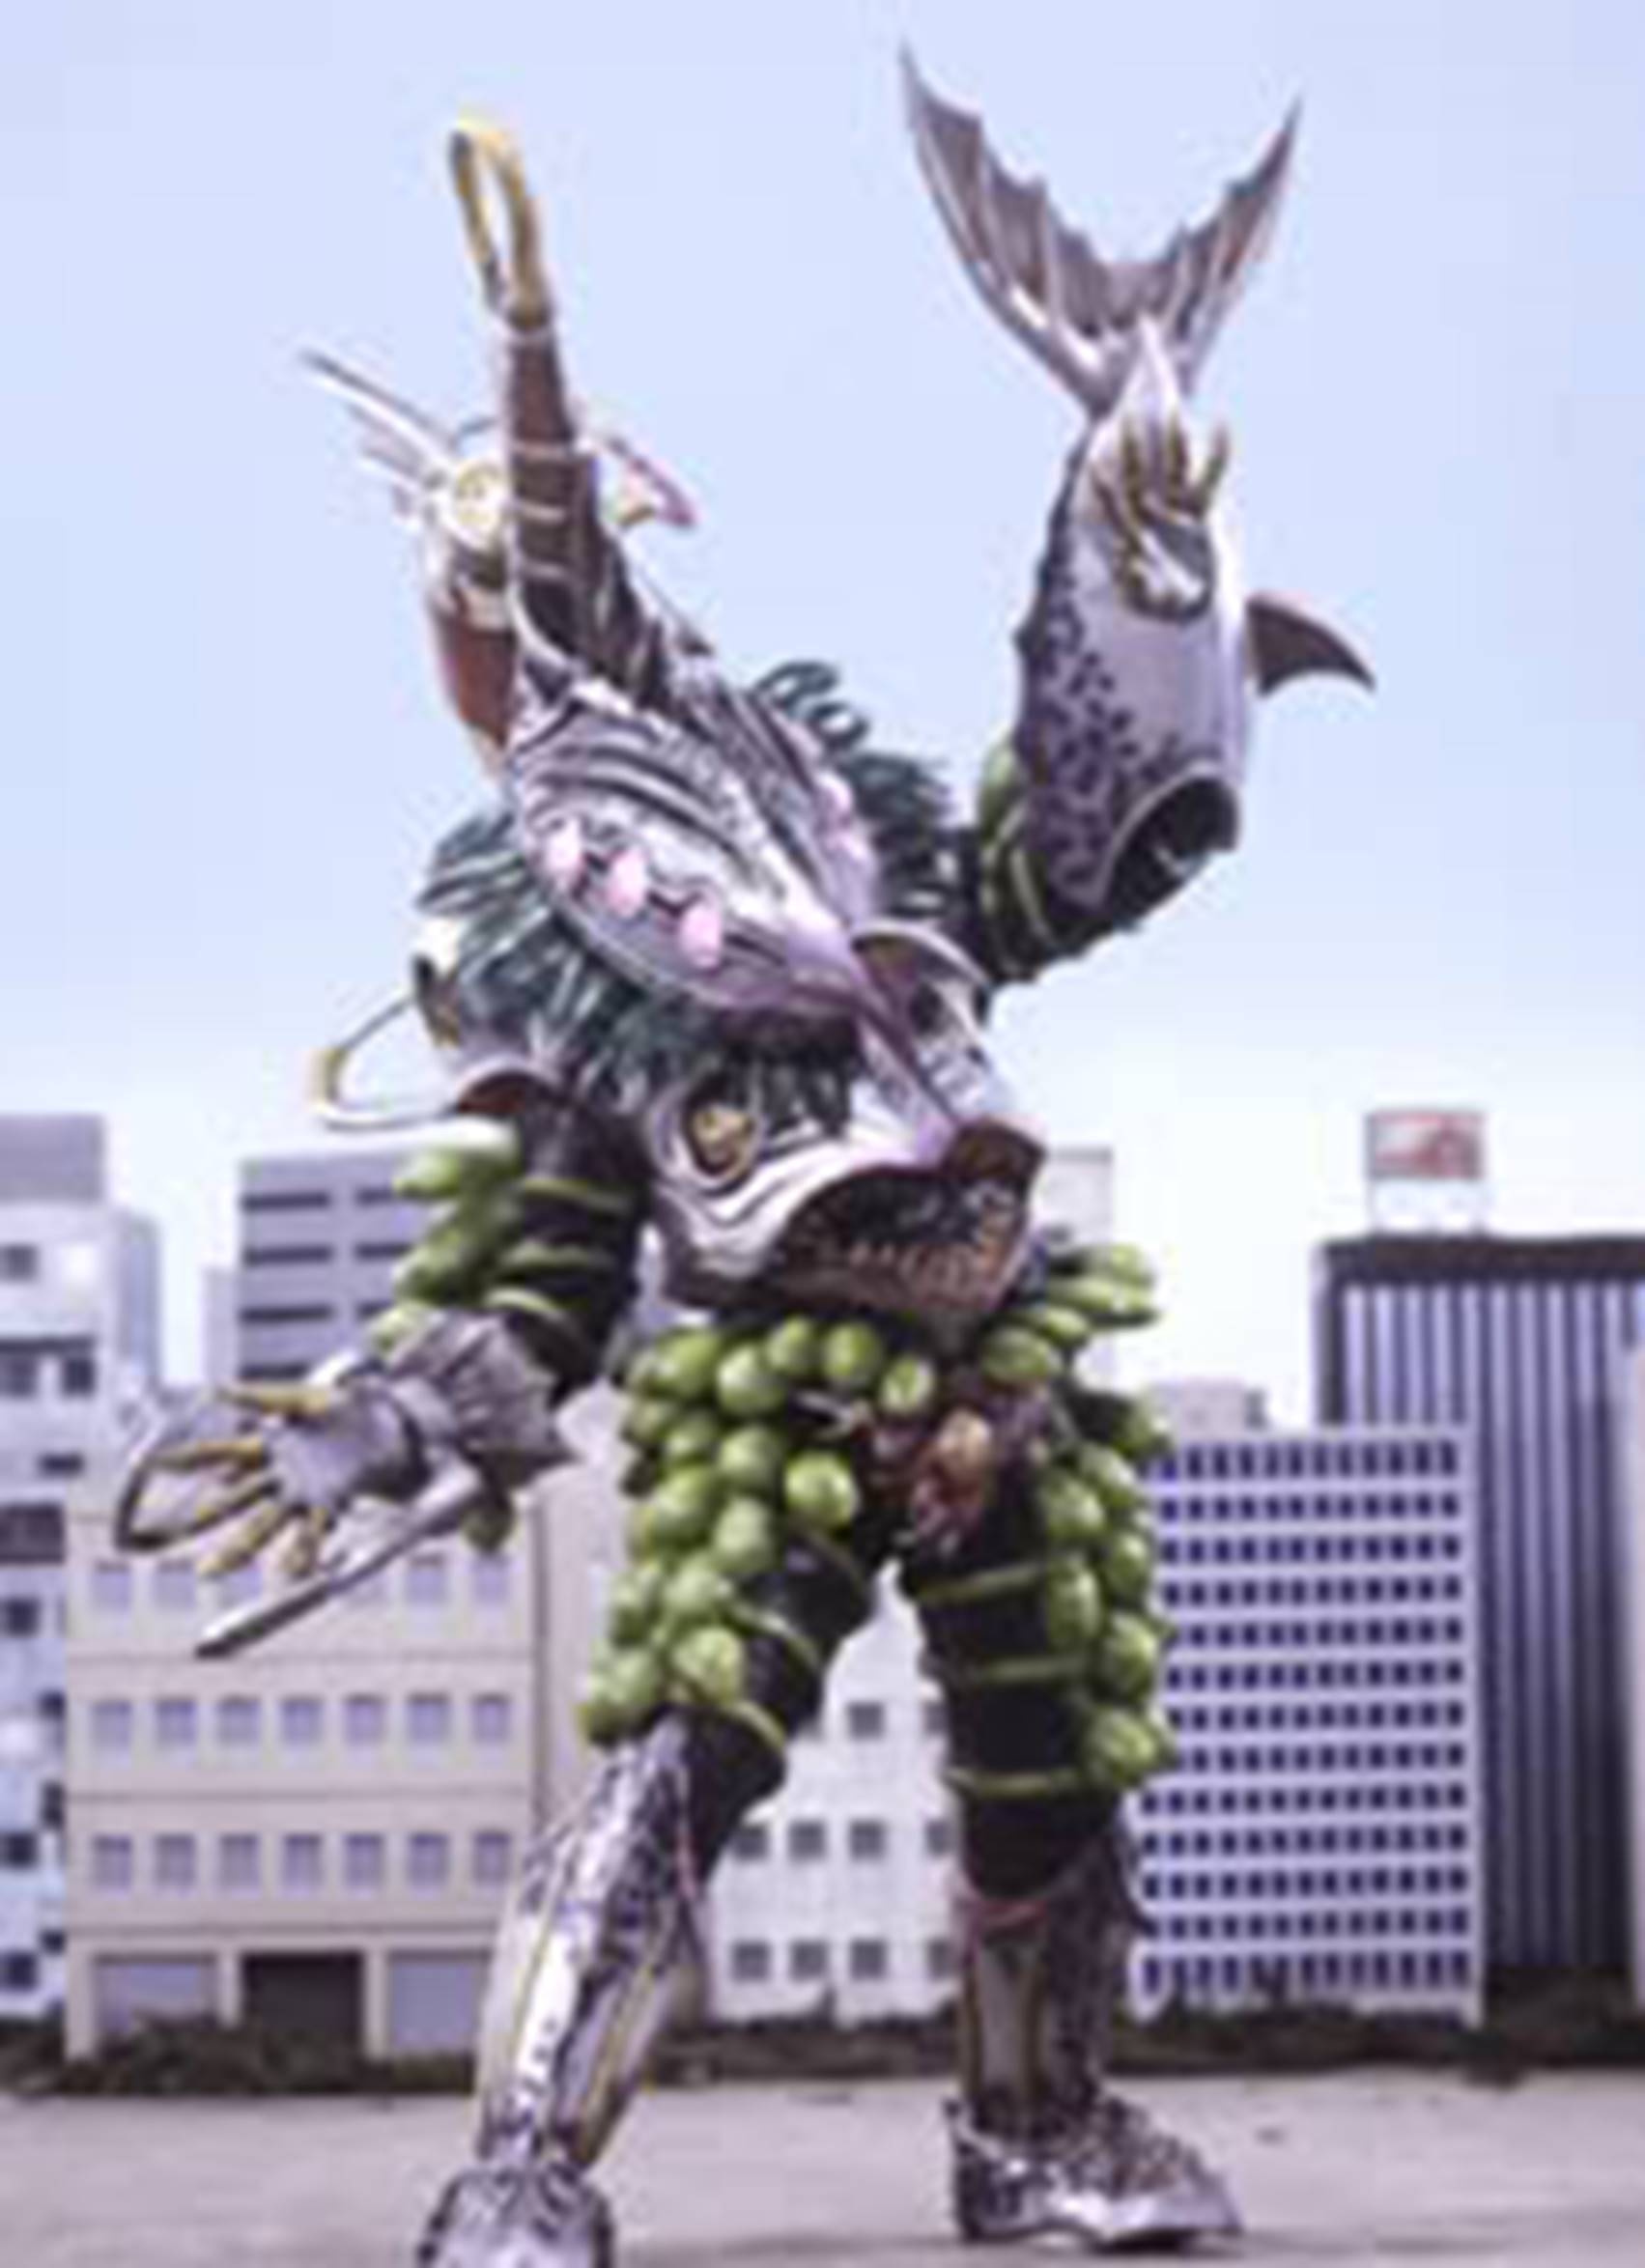 https://static.wikia.nocookie.net/powerrangers/images/d/d1/Trinoid_-15.jpg/revision/latest?cb=20170403115913